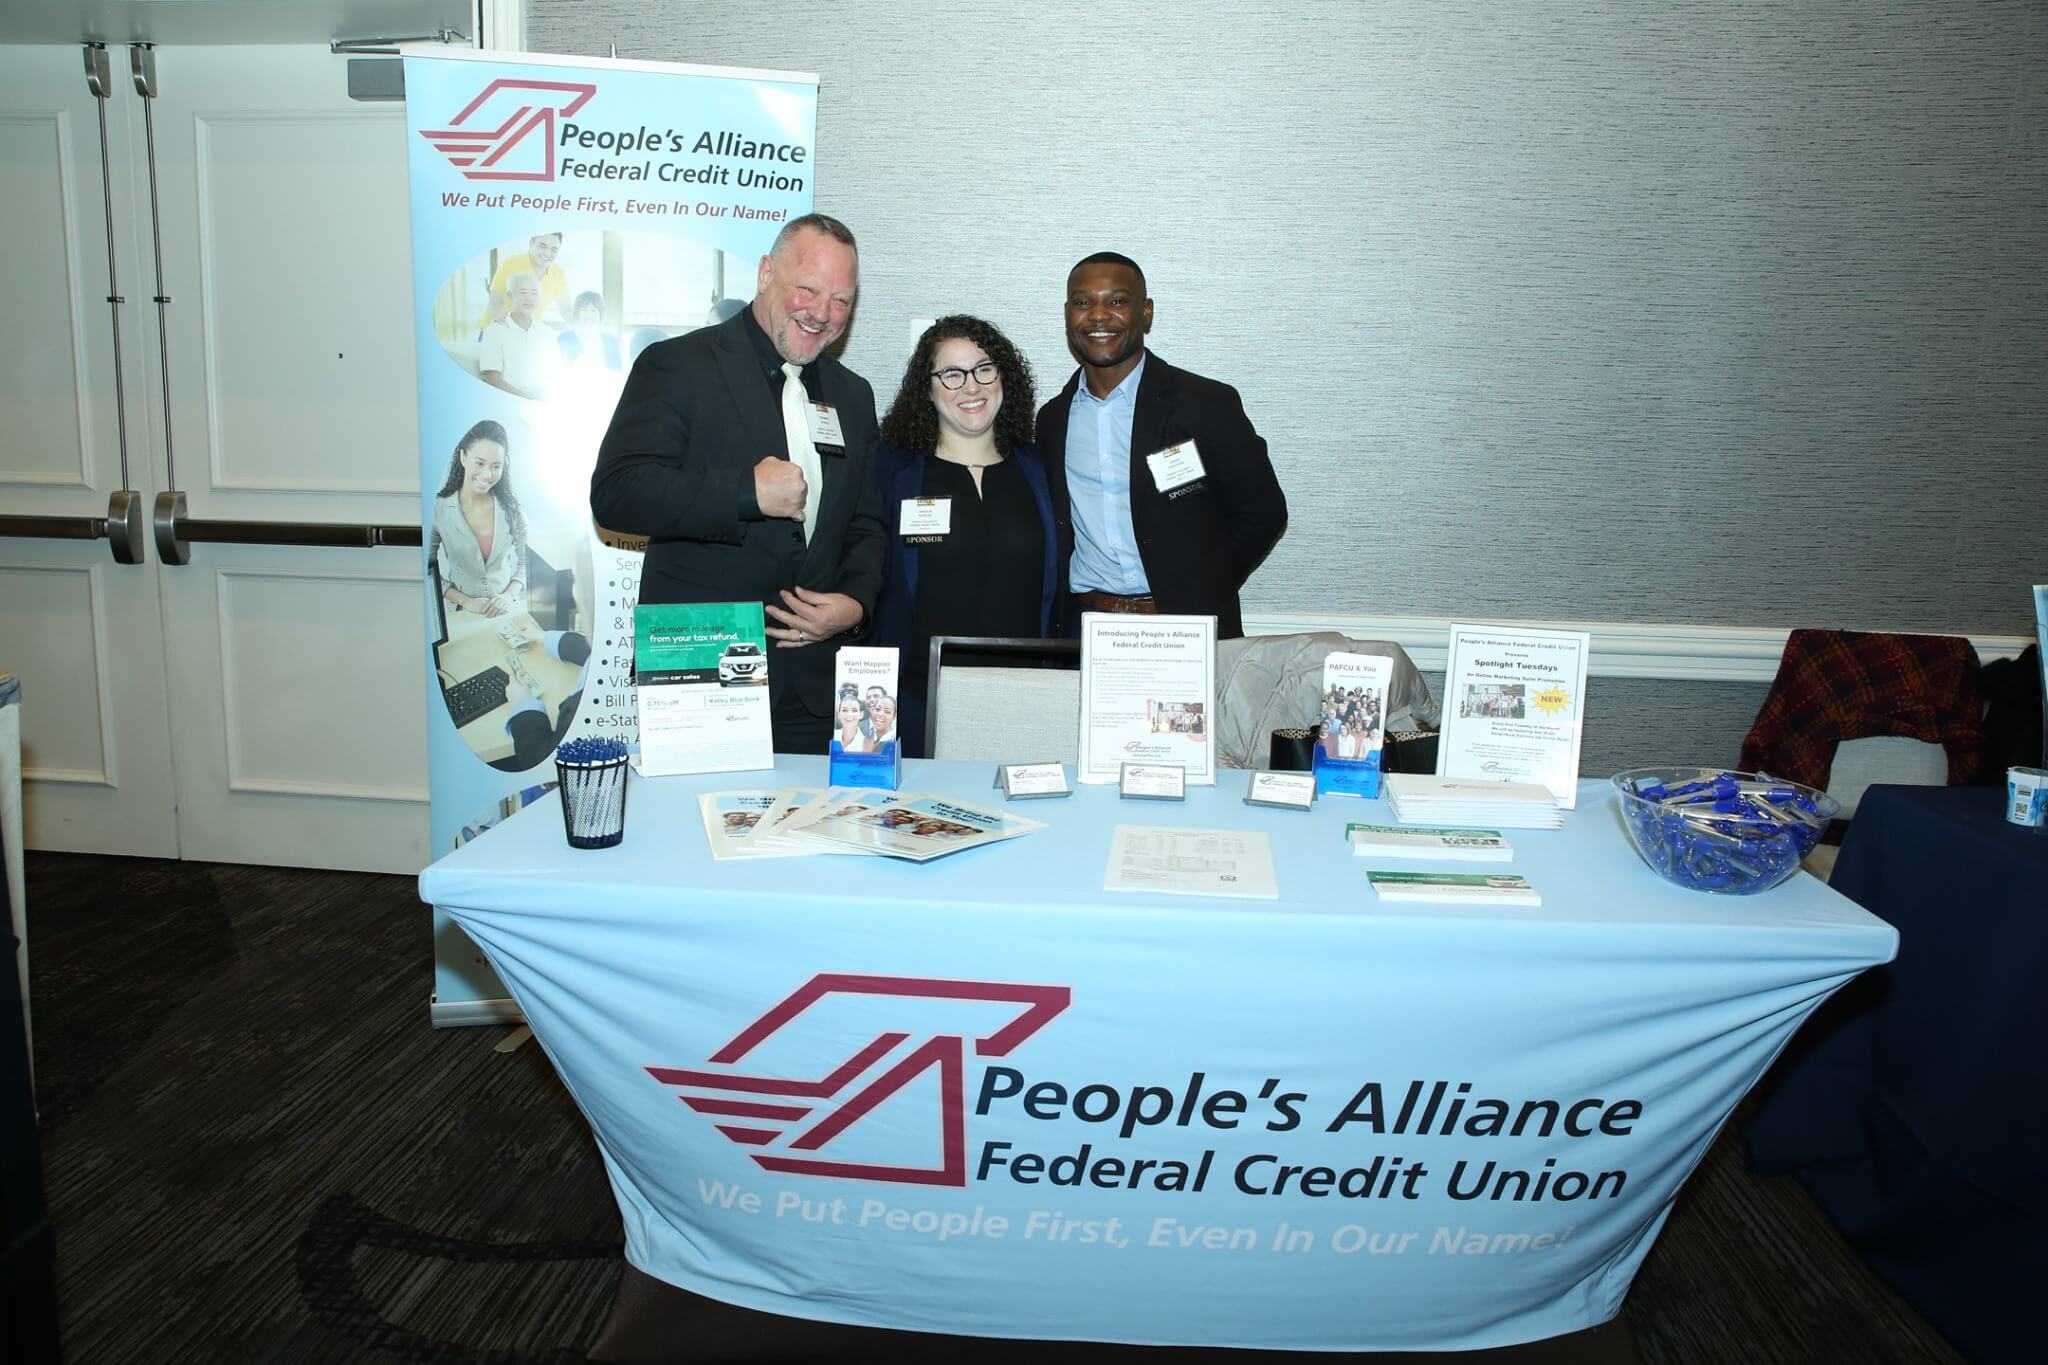 peoples alliance table